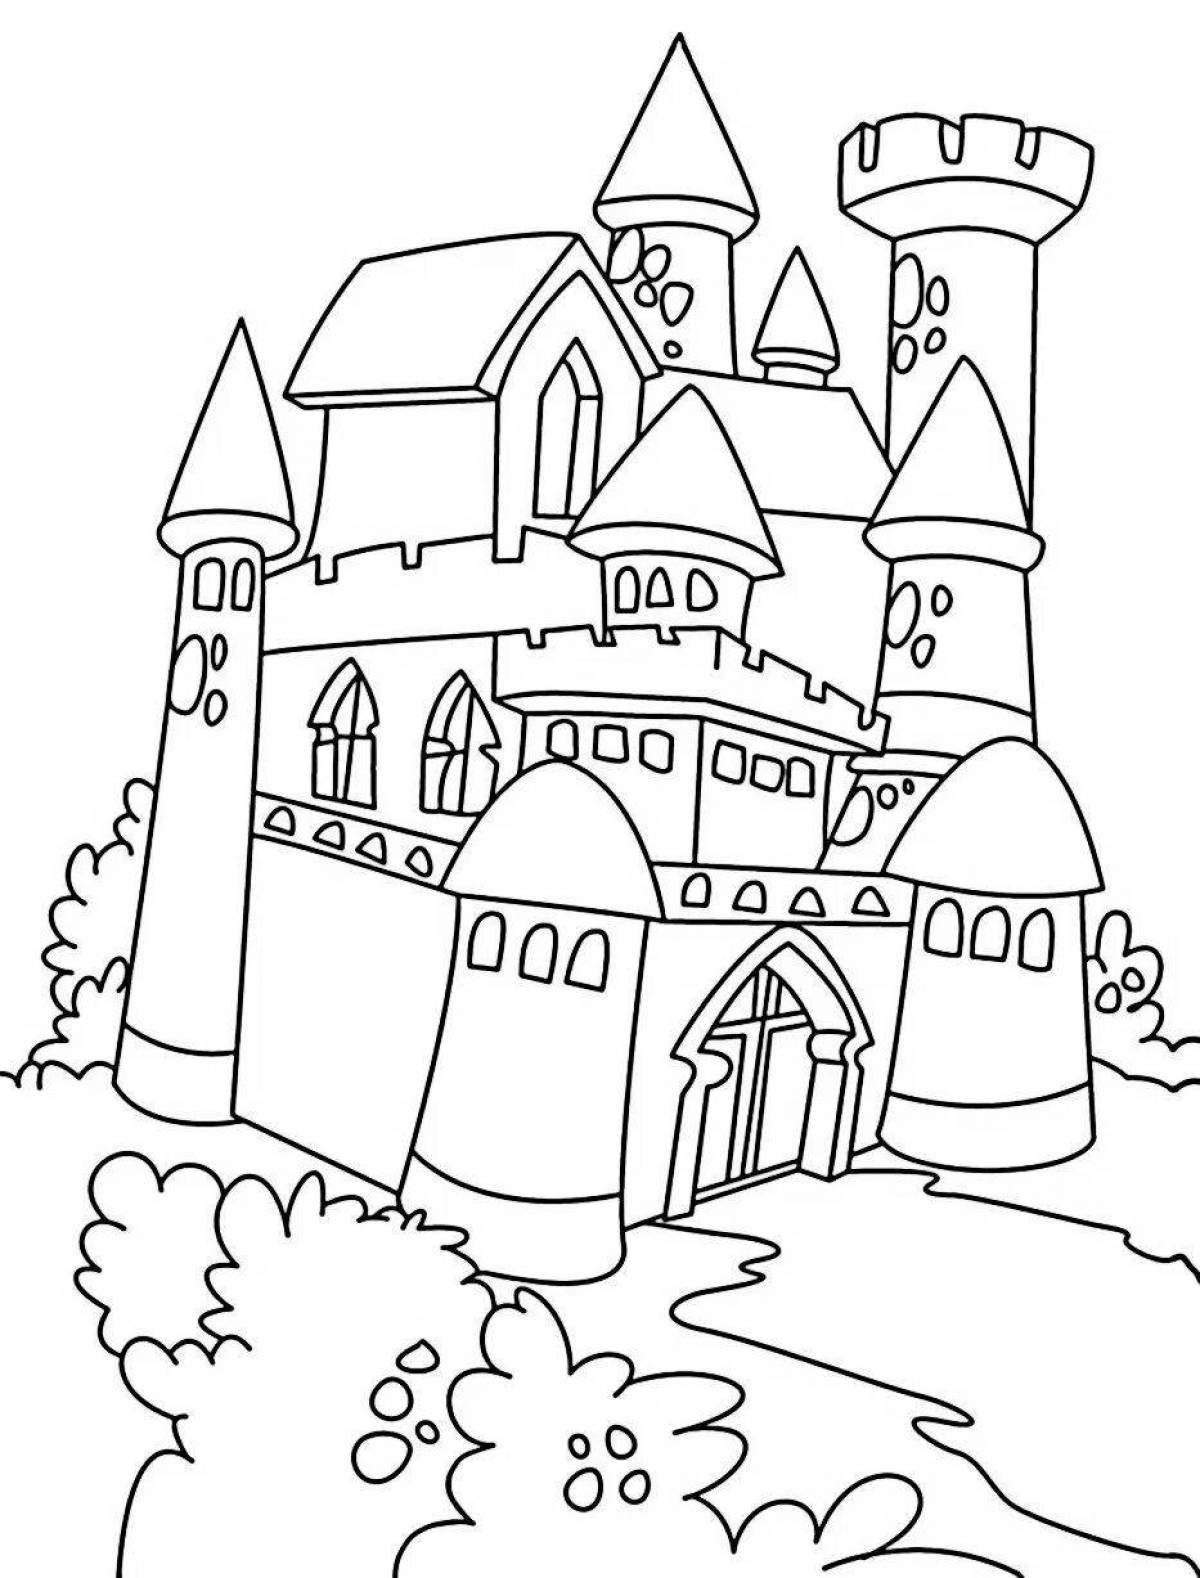 Amazing princess castle coloring book for kids